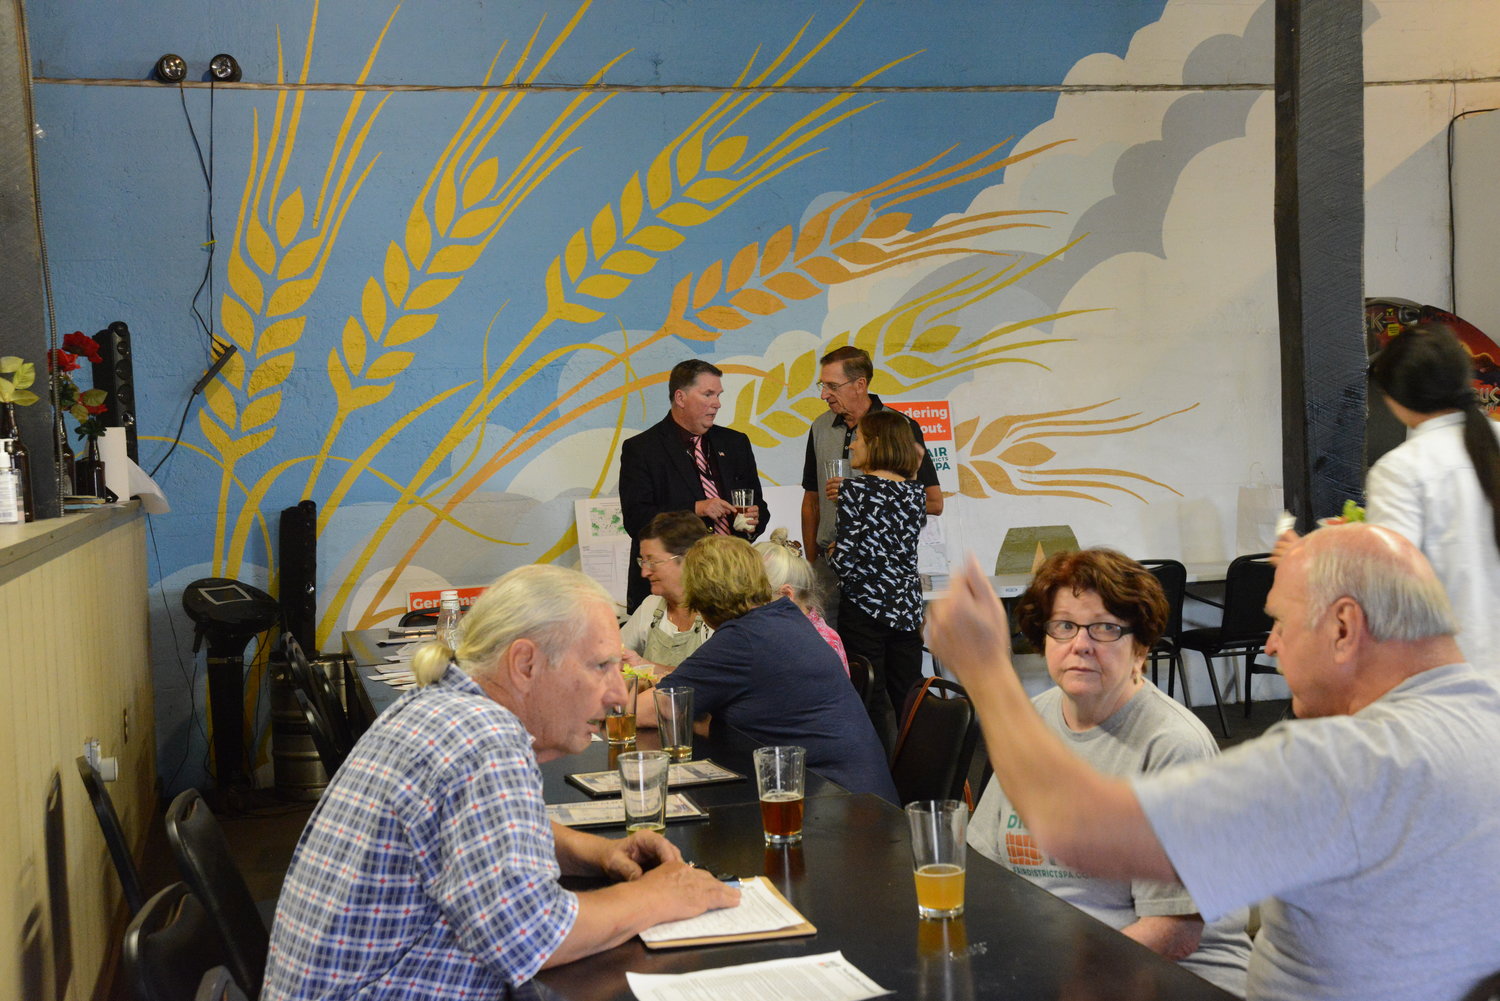 Wayne County residents discuss politics over some beer and food at the Iriving Cliff Brewery.